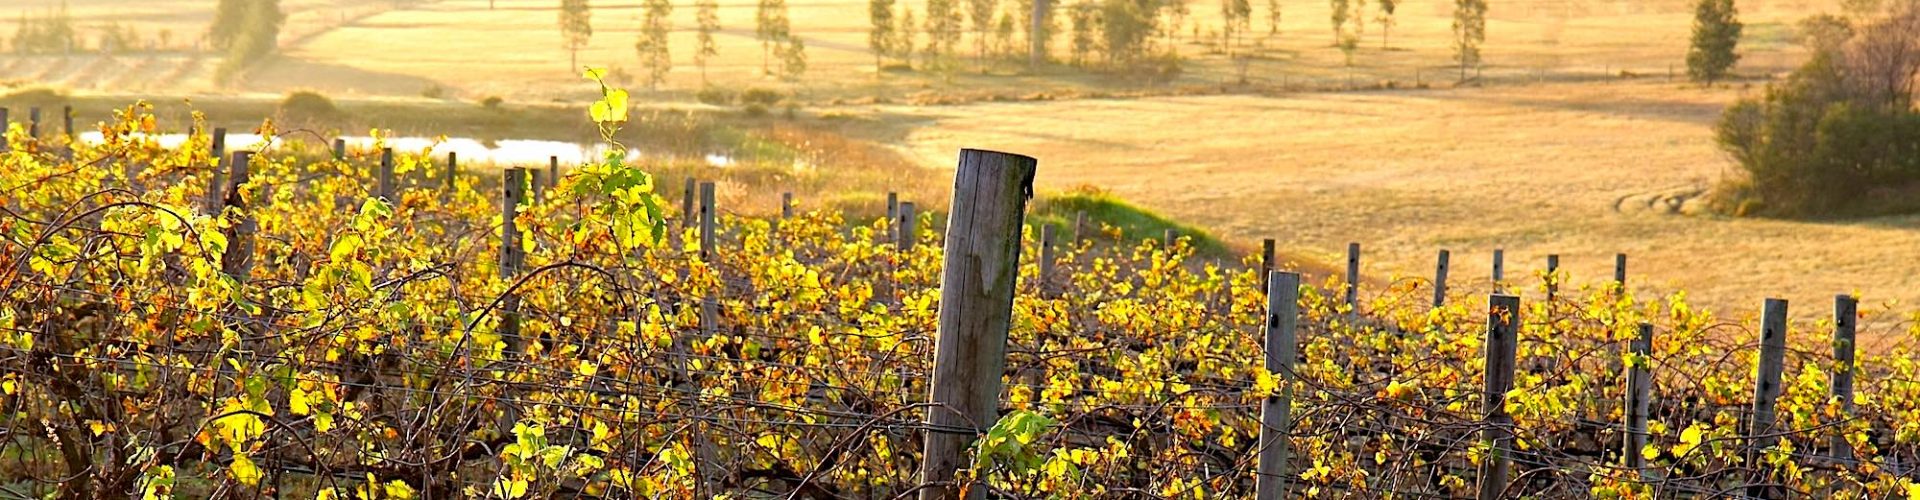 10 Best Things to Do in the Hunter Valley Region, NSW inner banner